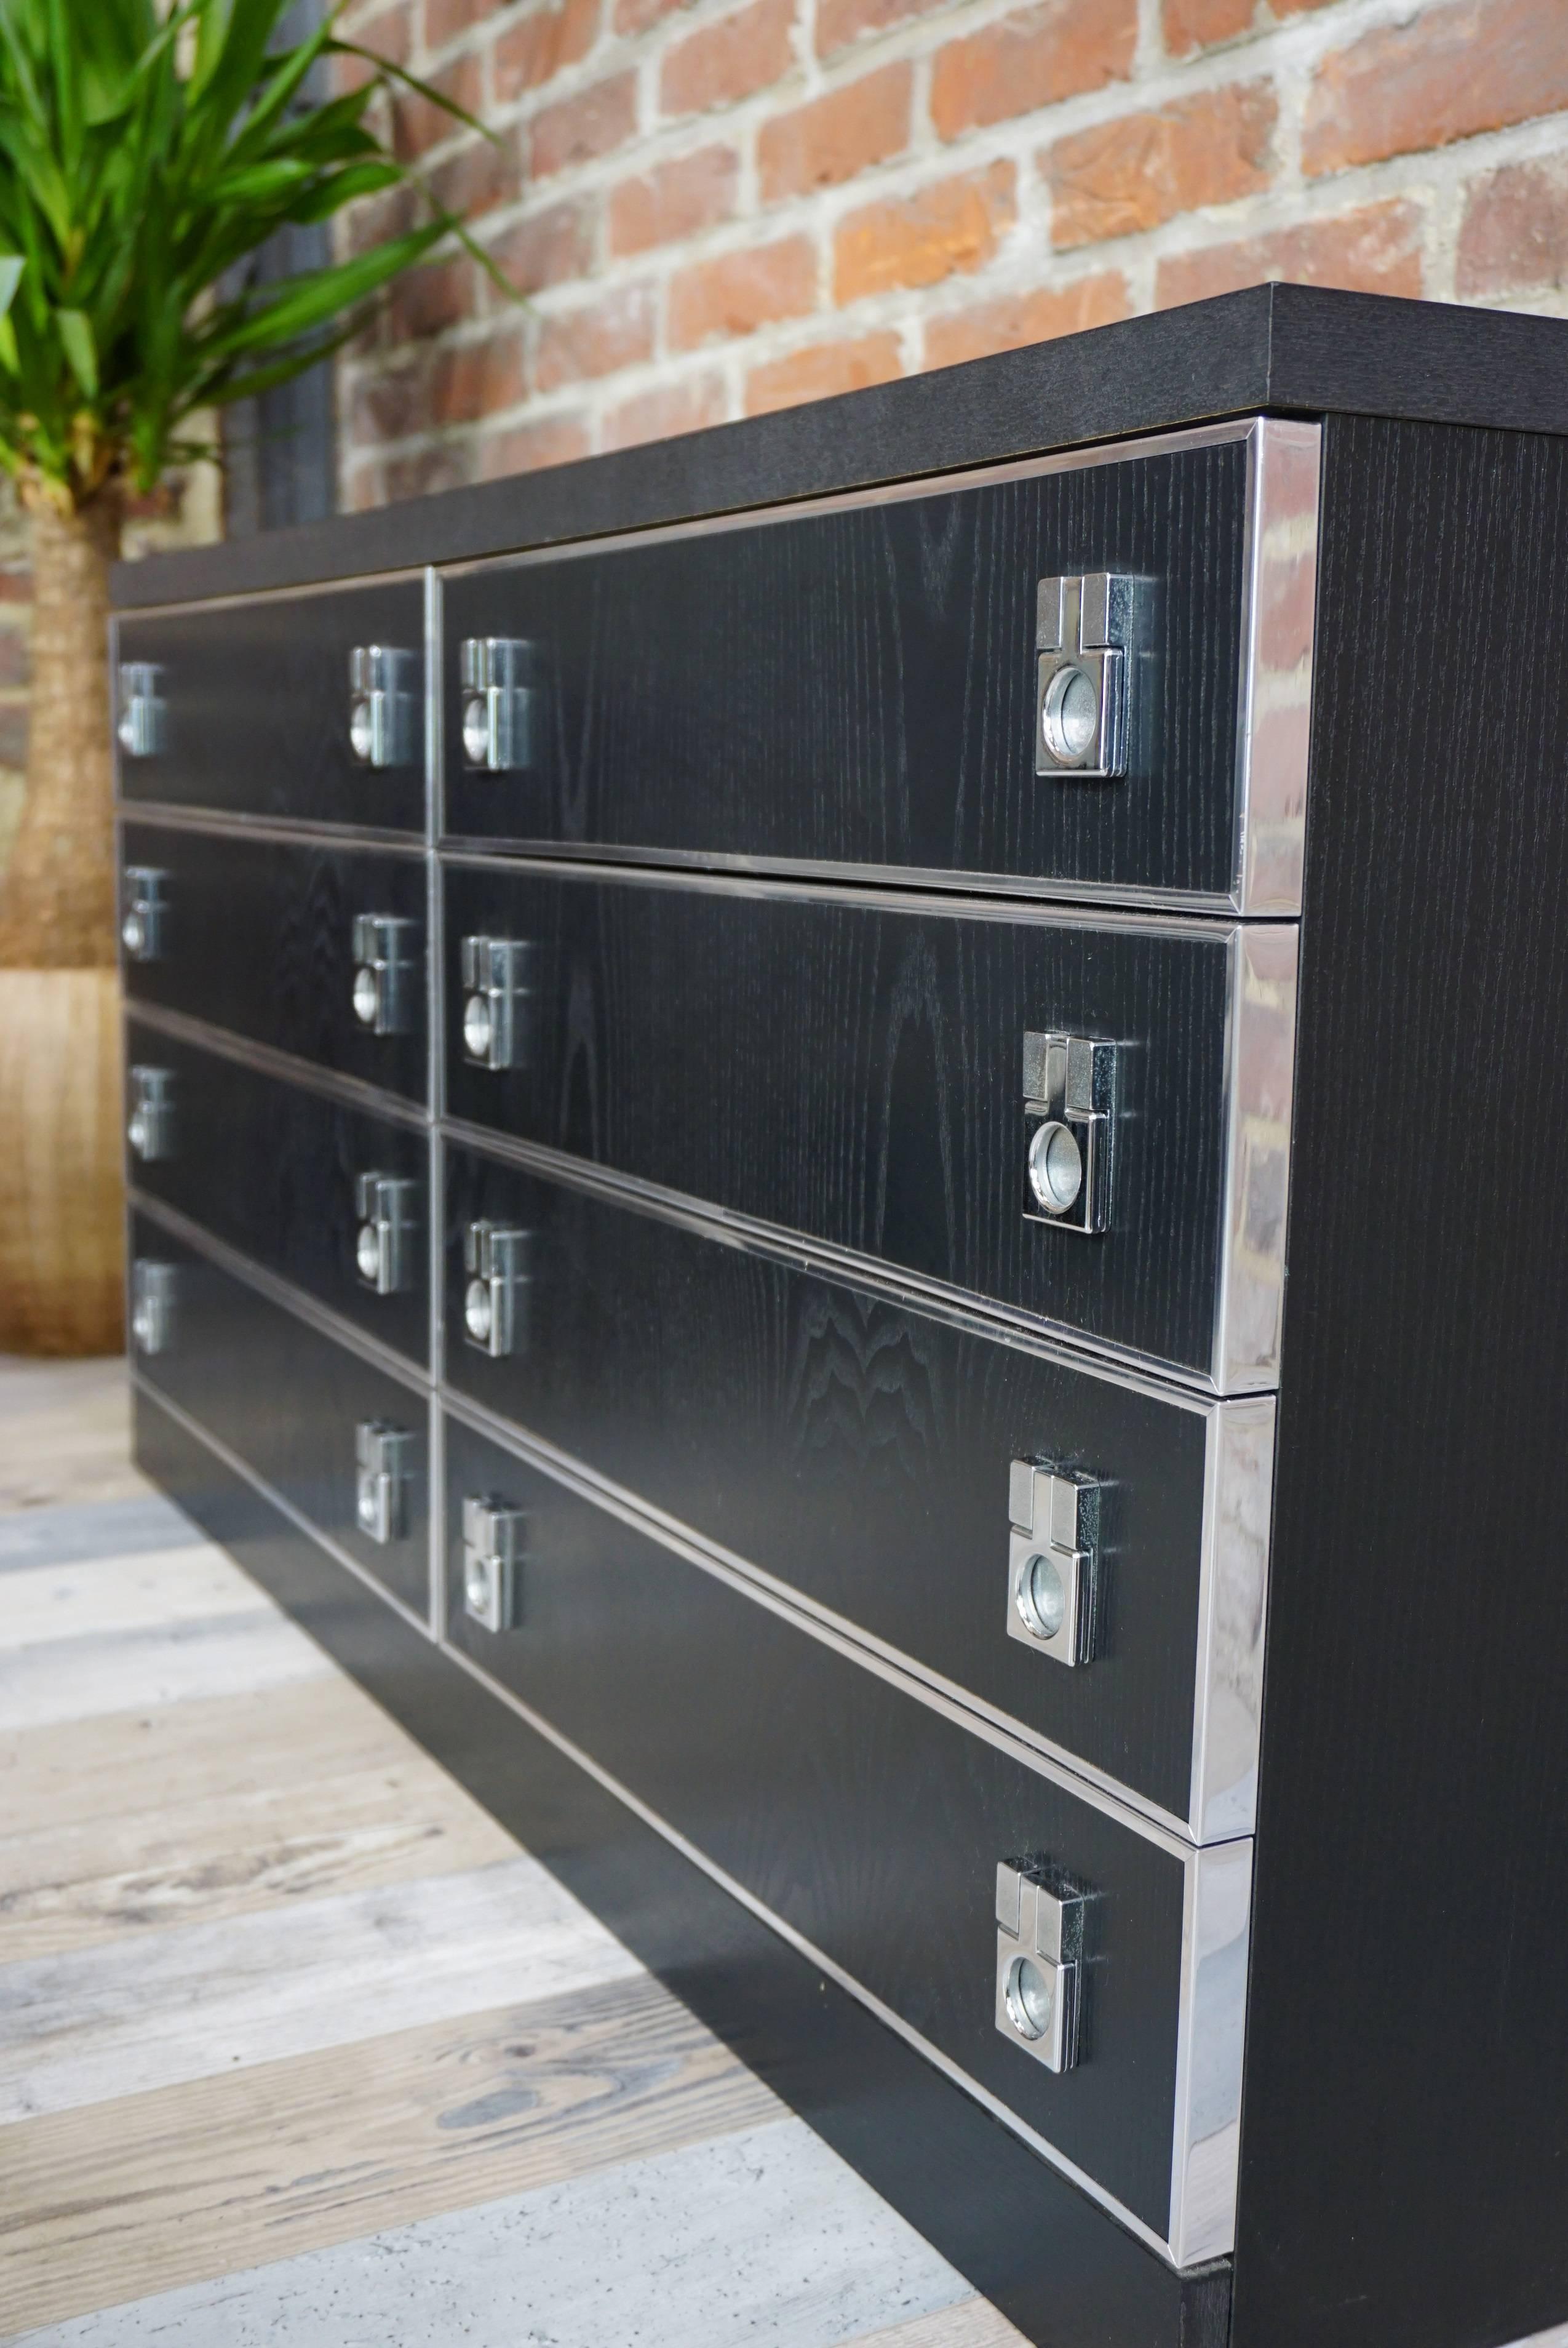 Simple lines and Minimalist design for this long black dresser with large storage space: eight drawers which have each subtly crafted facade, framed by a chrome edging and chrome metal handle, too. In very good state of conservation.